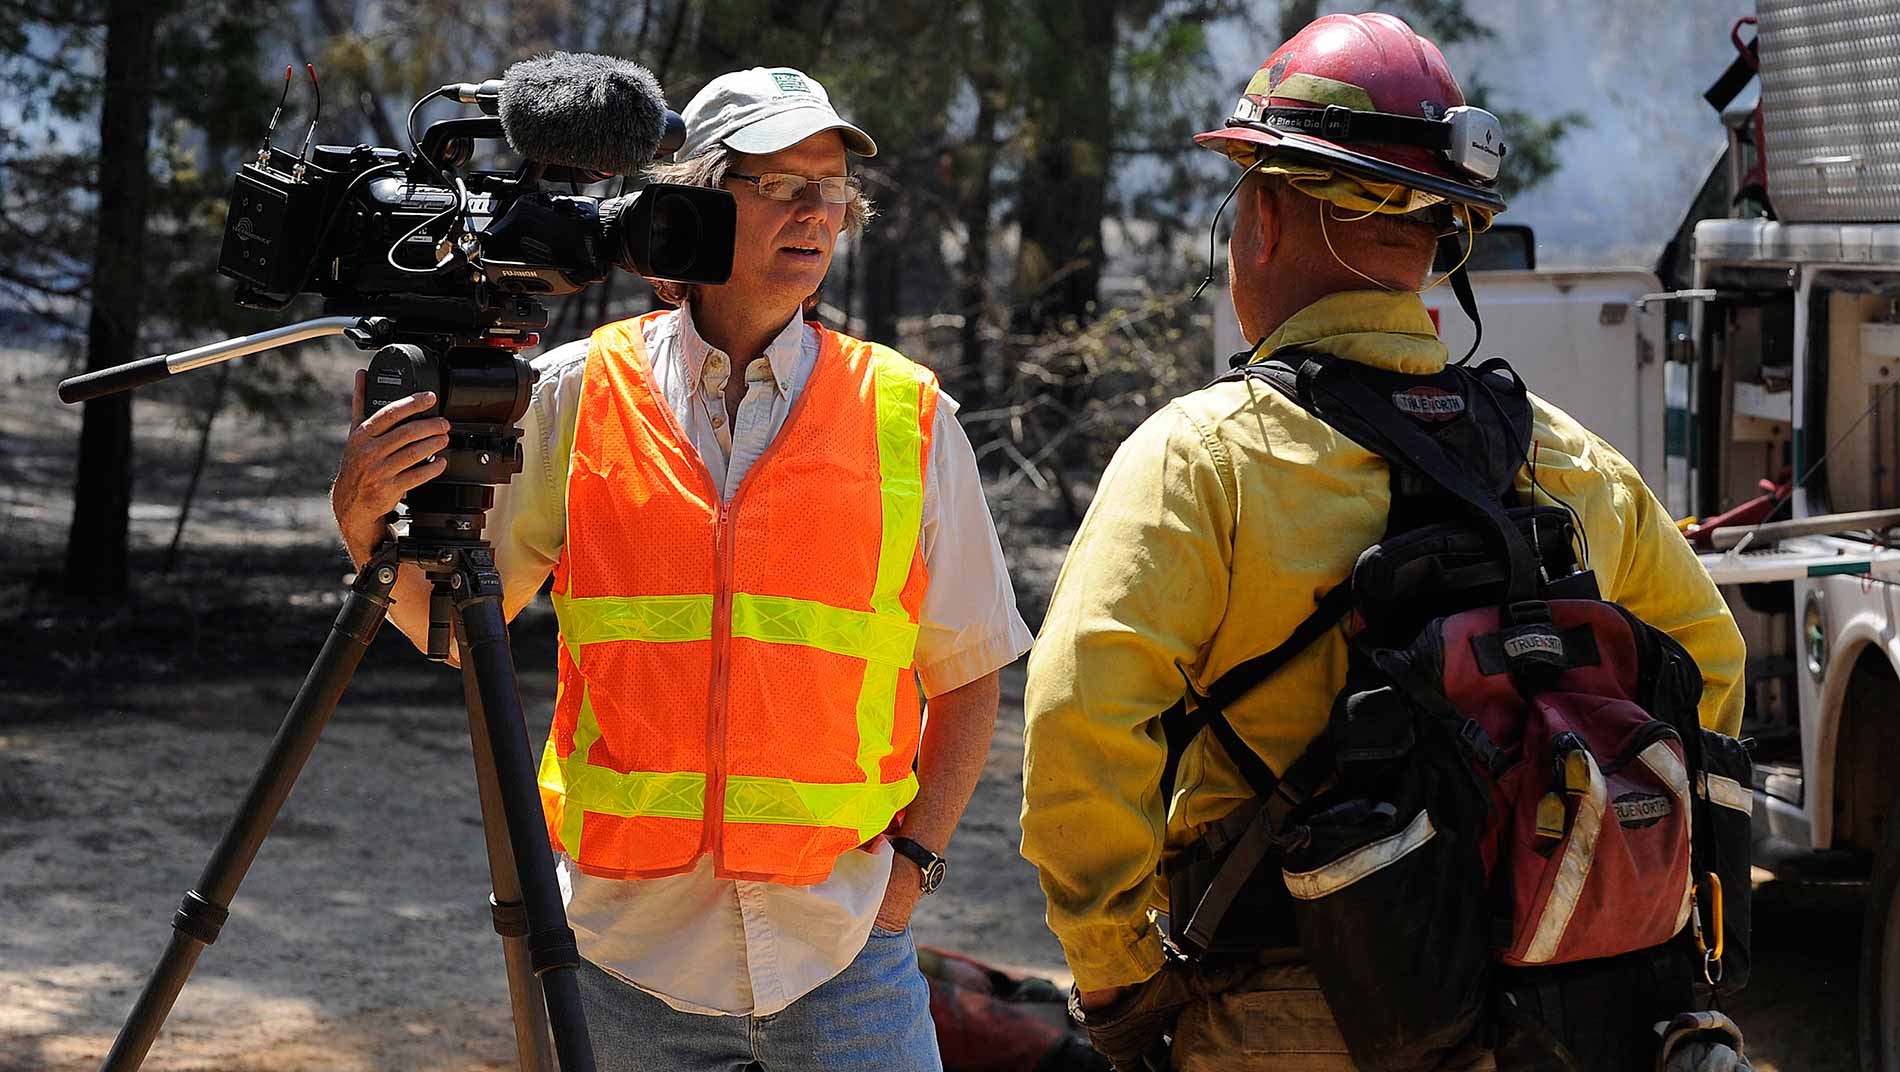 Producer Don Cash interviews a member of the Wildland Fire Team after the Bastrop State Park fire.